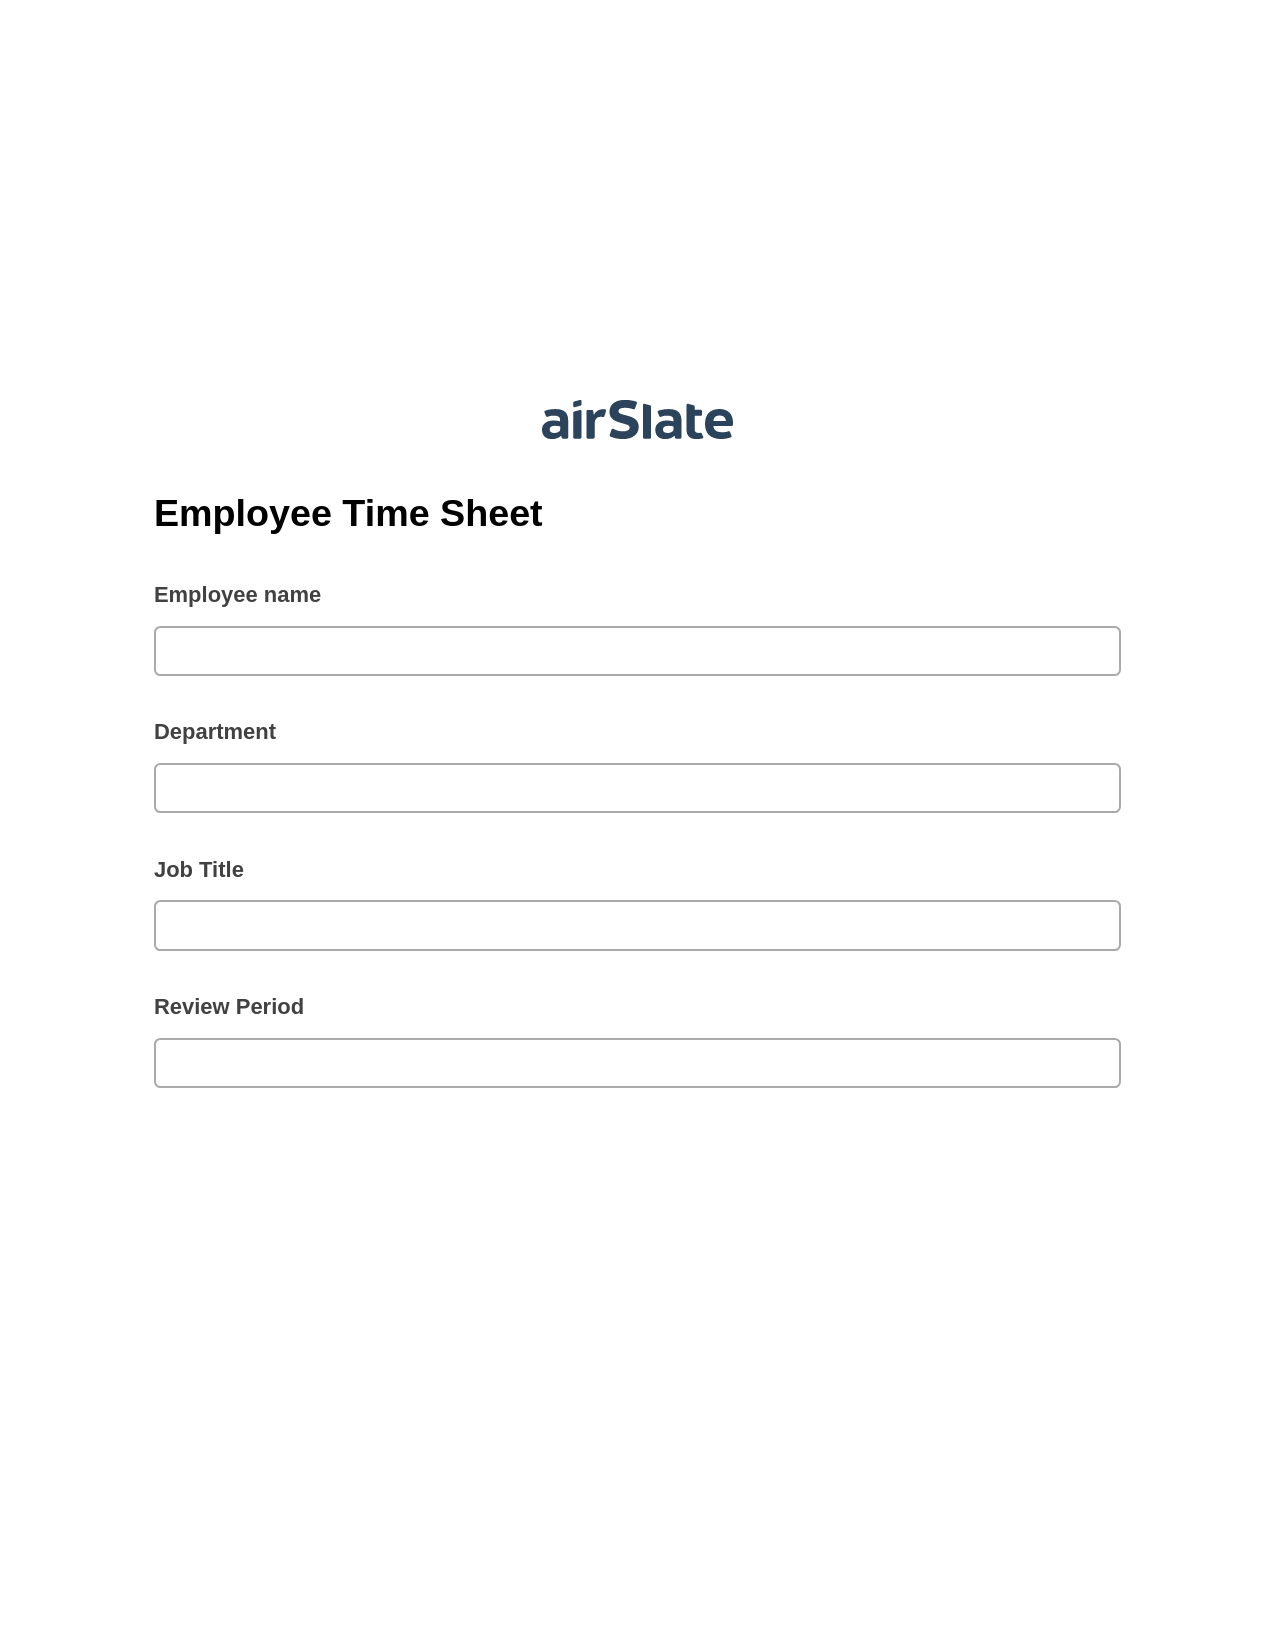 Employee Time Sheet Pre-fill from Salesforce Records with SOQL Bot, Create Salesforce Records Bot, Export to Excel 365 Bot